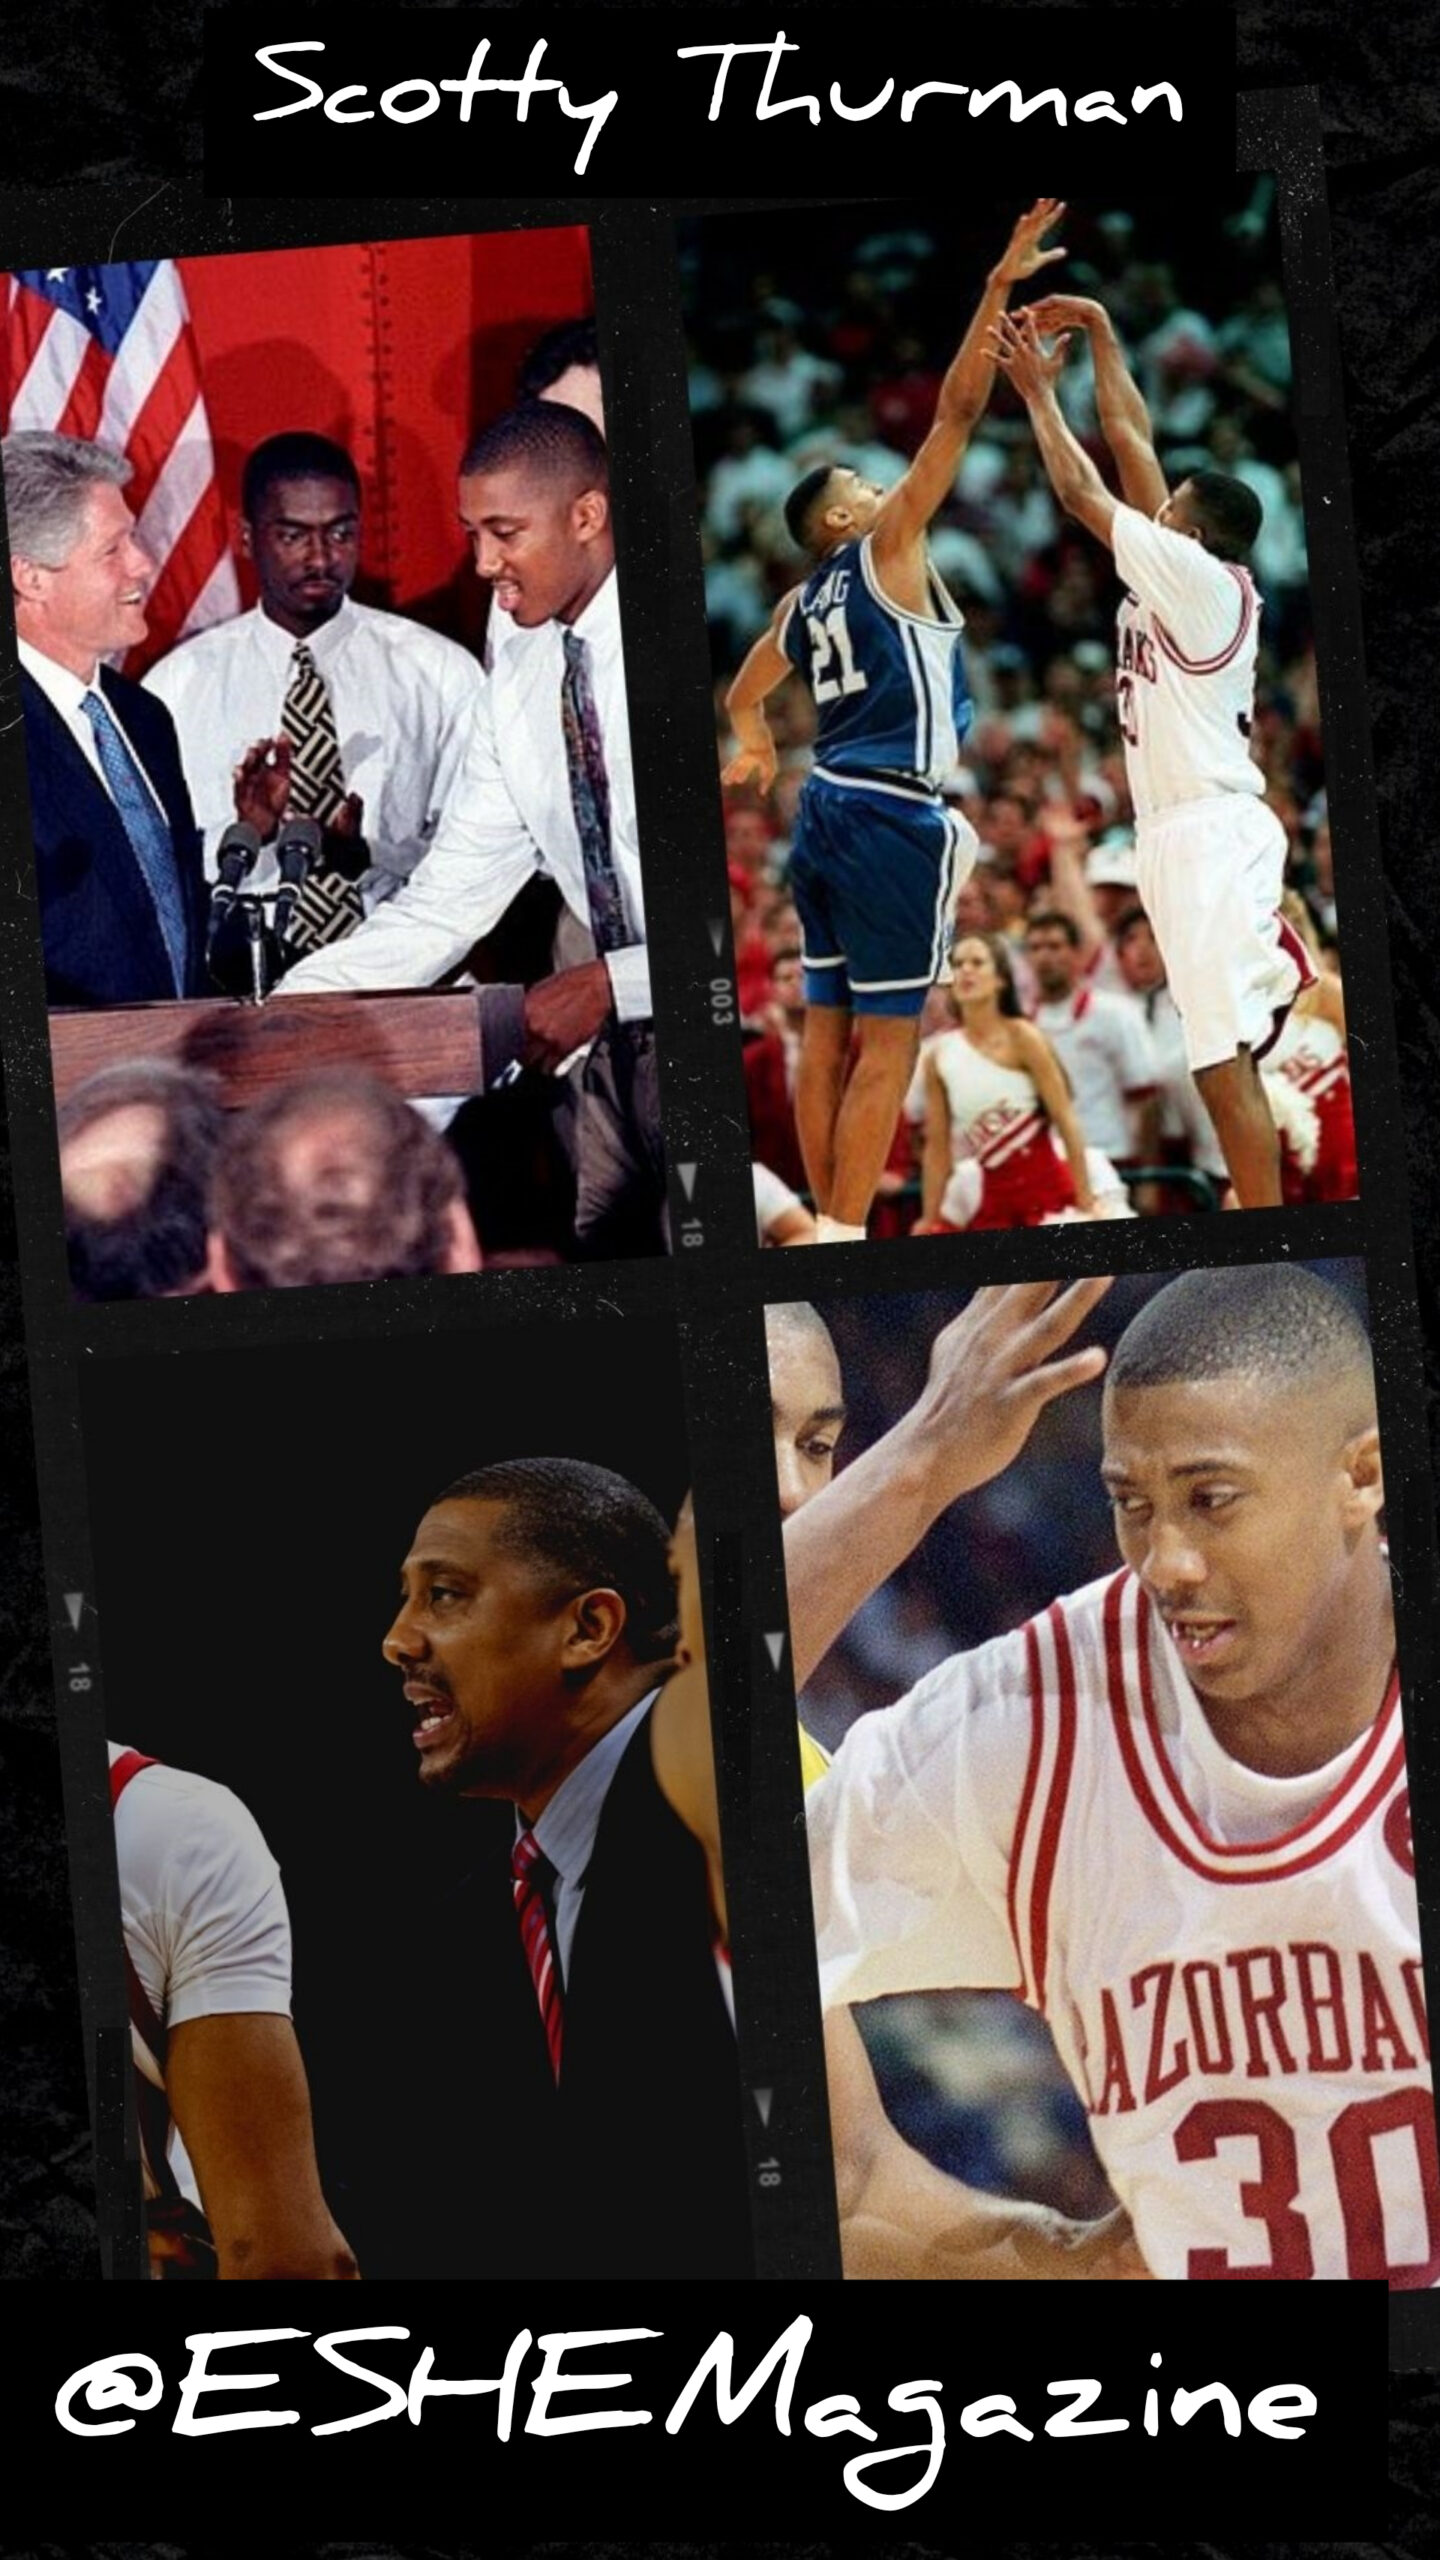 Arkansas Razorback, SEC And NCAA Basketball Legend Scotty Thurman Talks About His Life, Career, Coach Nolan Richardson And How He’s Been Able To Coach And Mentor Young Men On And Off The Court